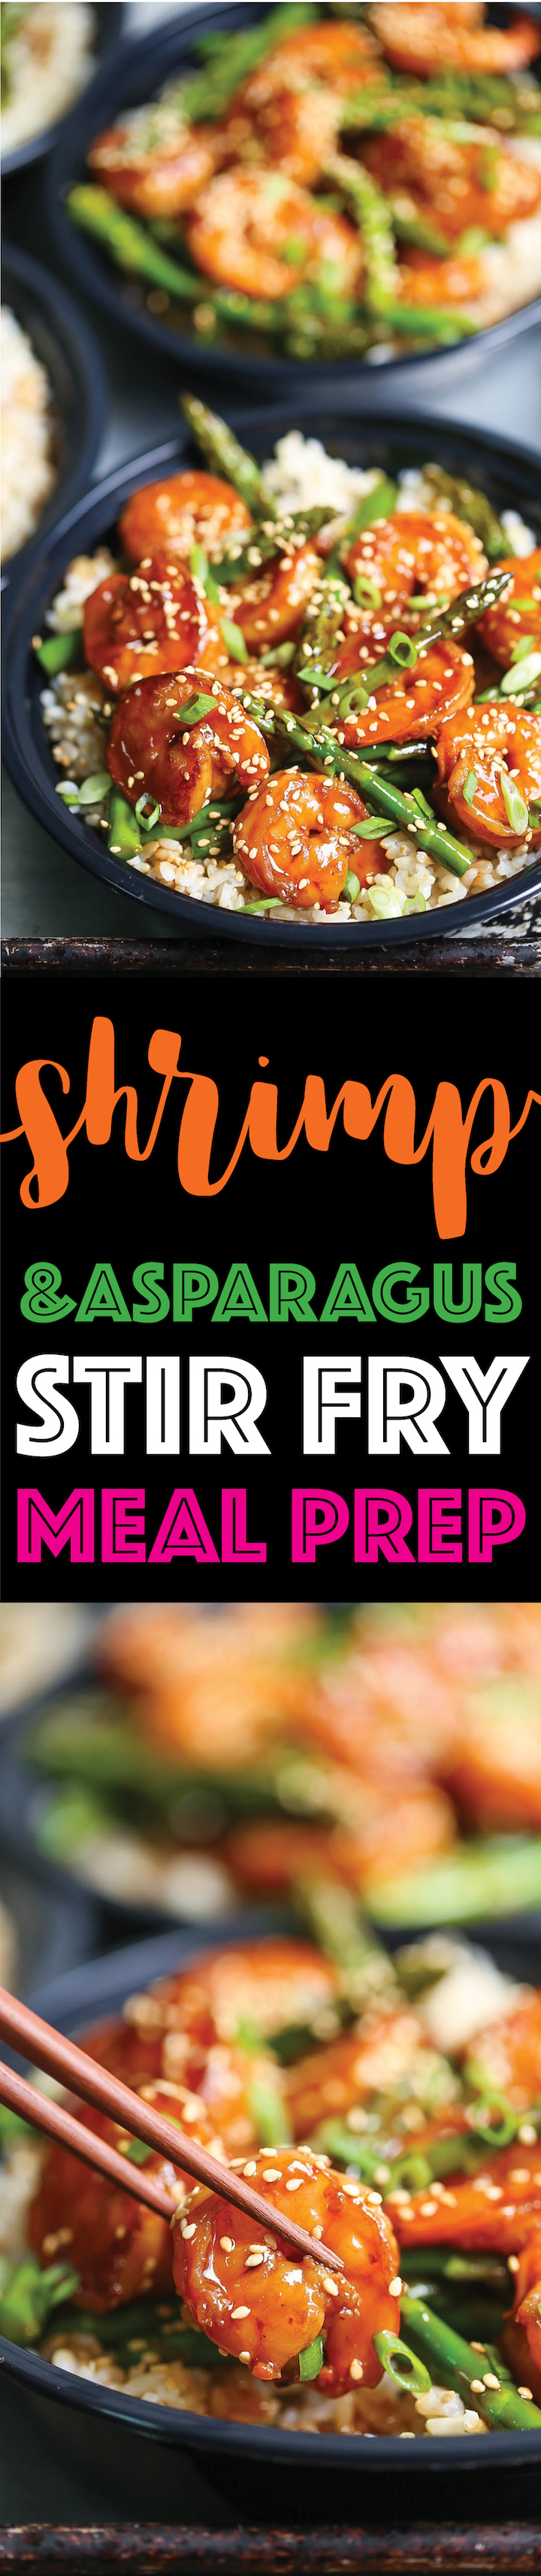 Shrimp and Asparagus Stir Fry Meal Prep - An easy stir fry that you can quickly prep ahead of time for the whole week! Simply add brown rice and you're set!